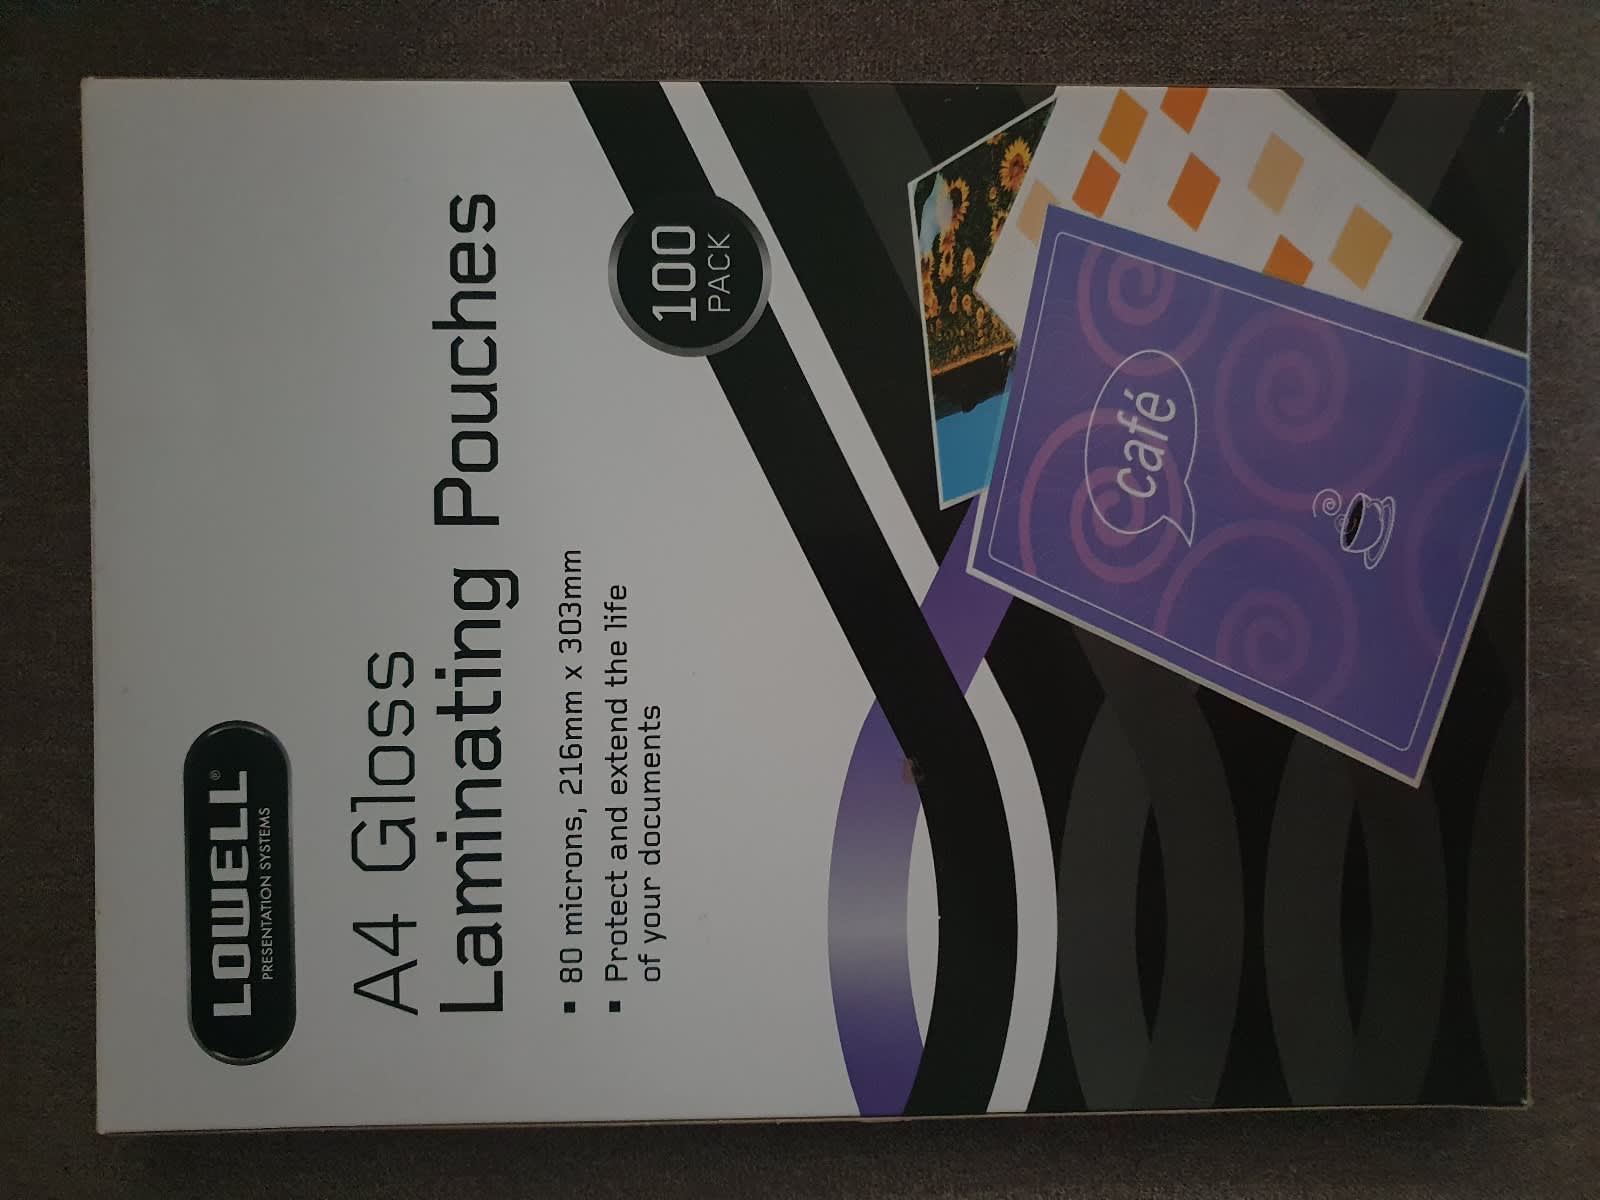 J.Burrows A4 Laminating Pouches Gloss 100 Pack